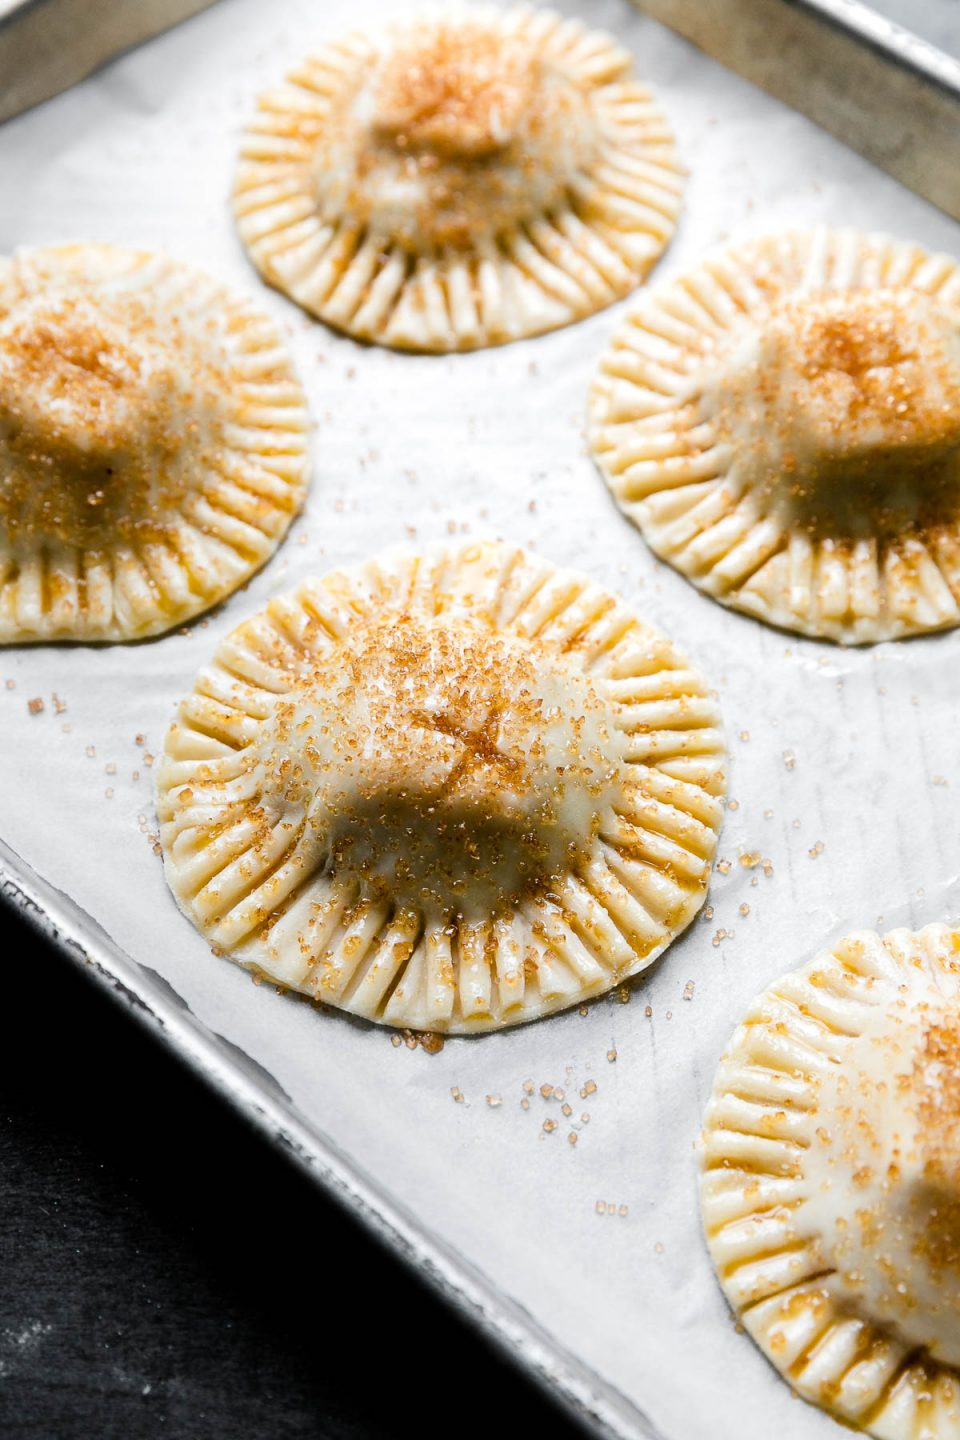 A side angle shot of six assembled Mini Baked Brie Bites arranged on a parchment paper lined baking sheet. The brie bites have been sealed with fork and have crimped edges. The brie bites have been brushed with egg wash and turbinado sugar has been sprinkled over top. The baking sheet sits atop a dark textured surface.